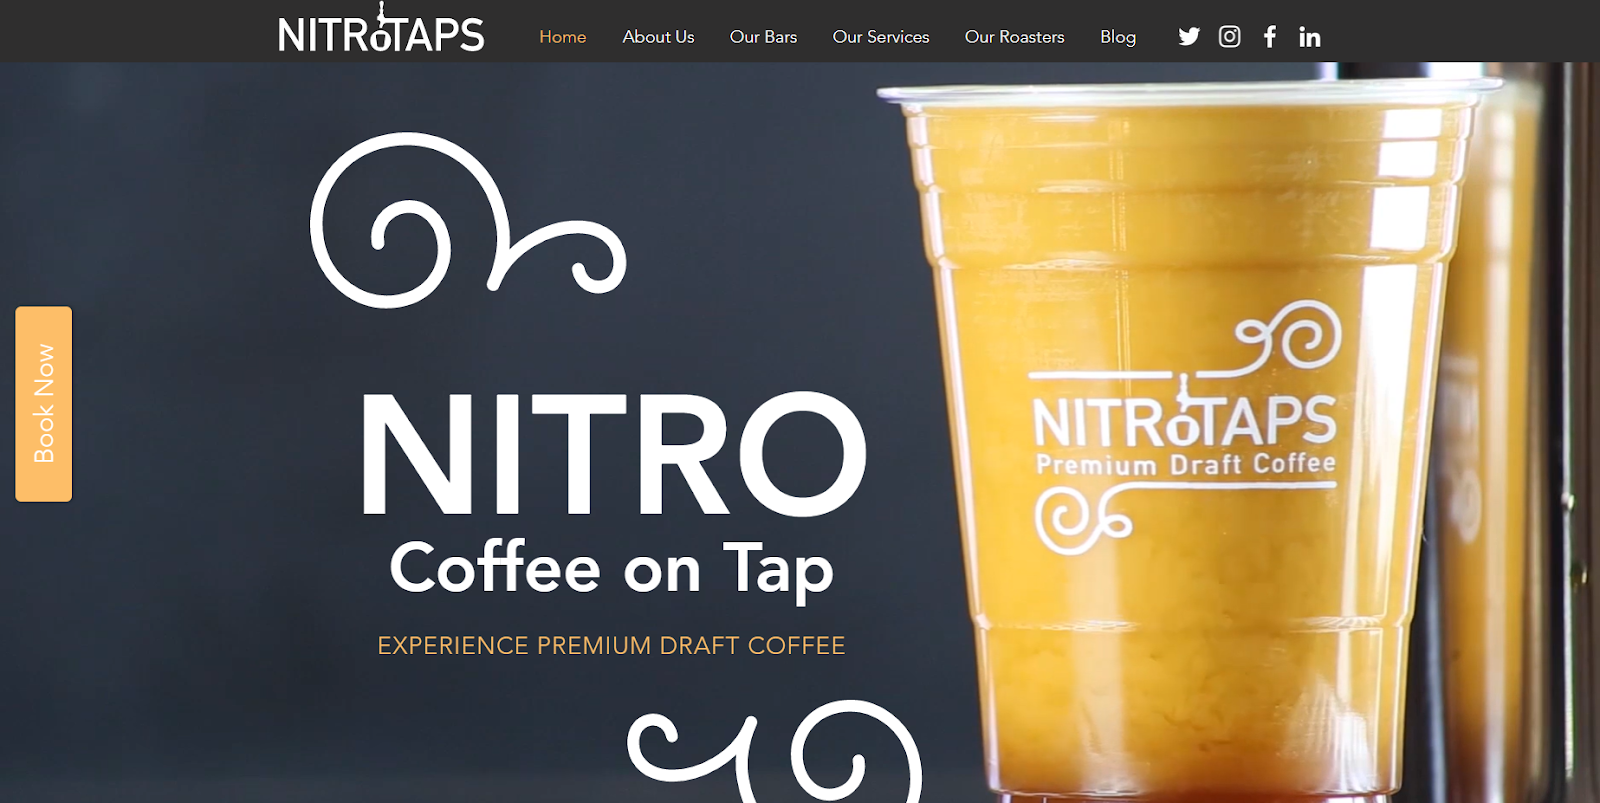 Food truck website design example from Nitro Taps.